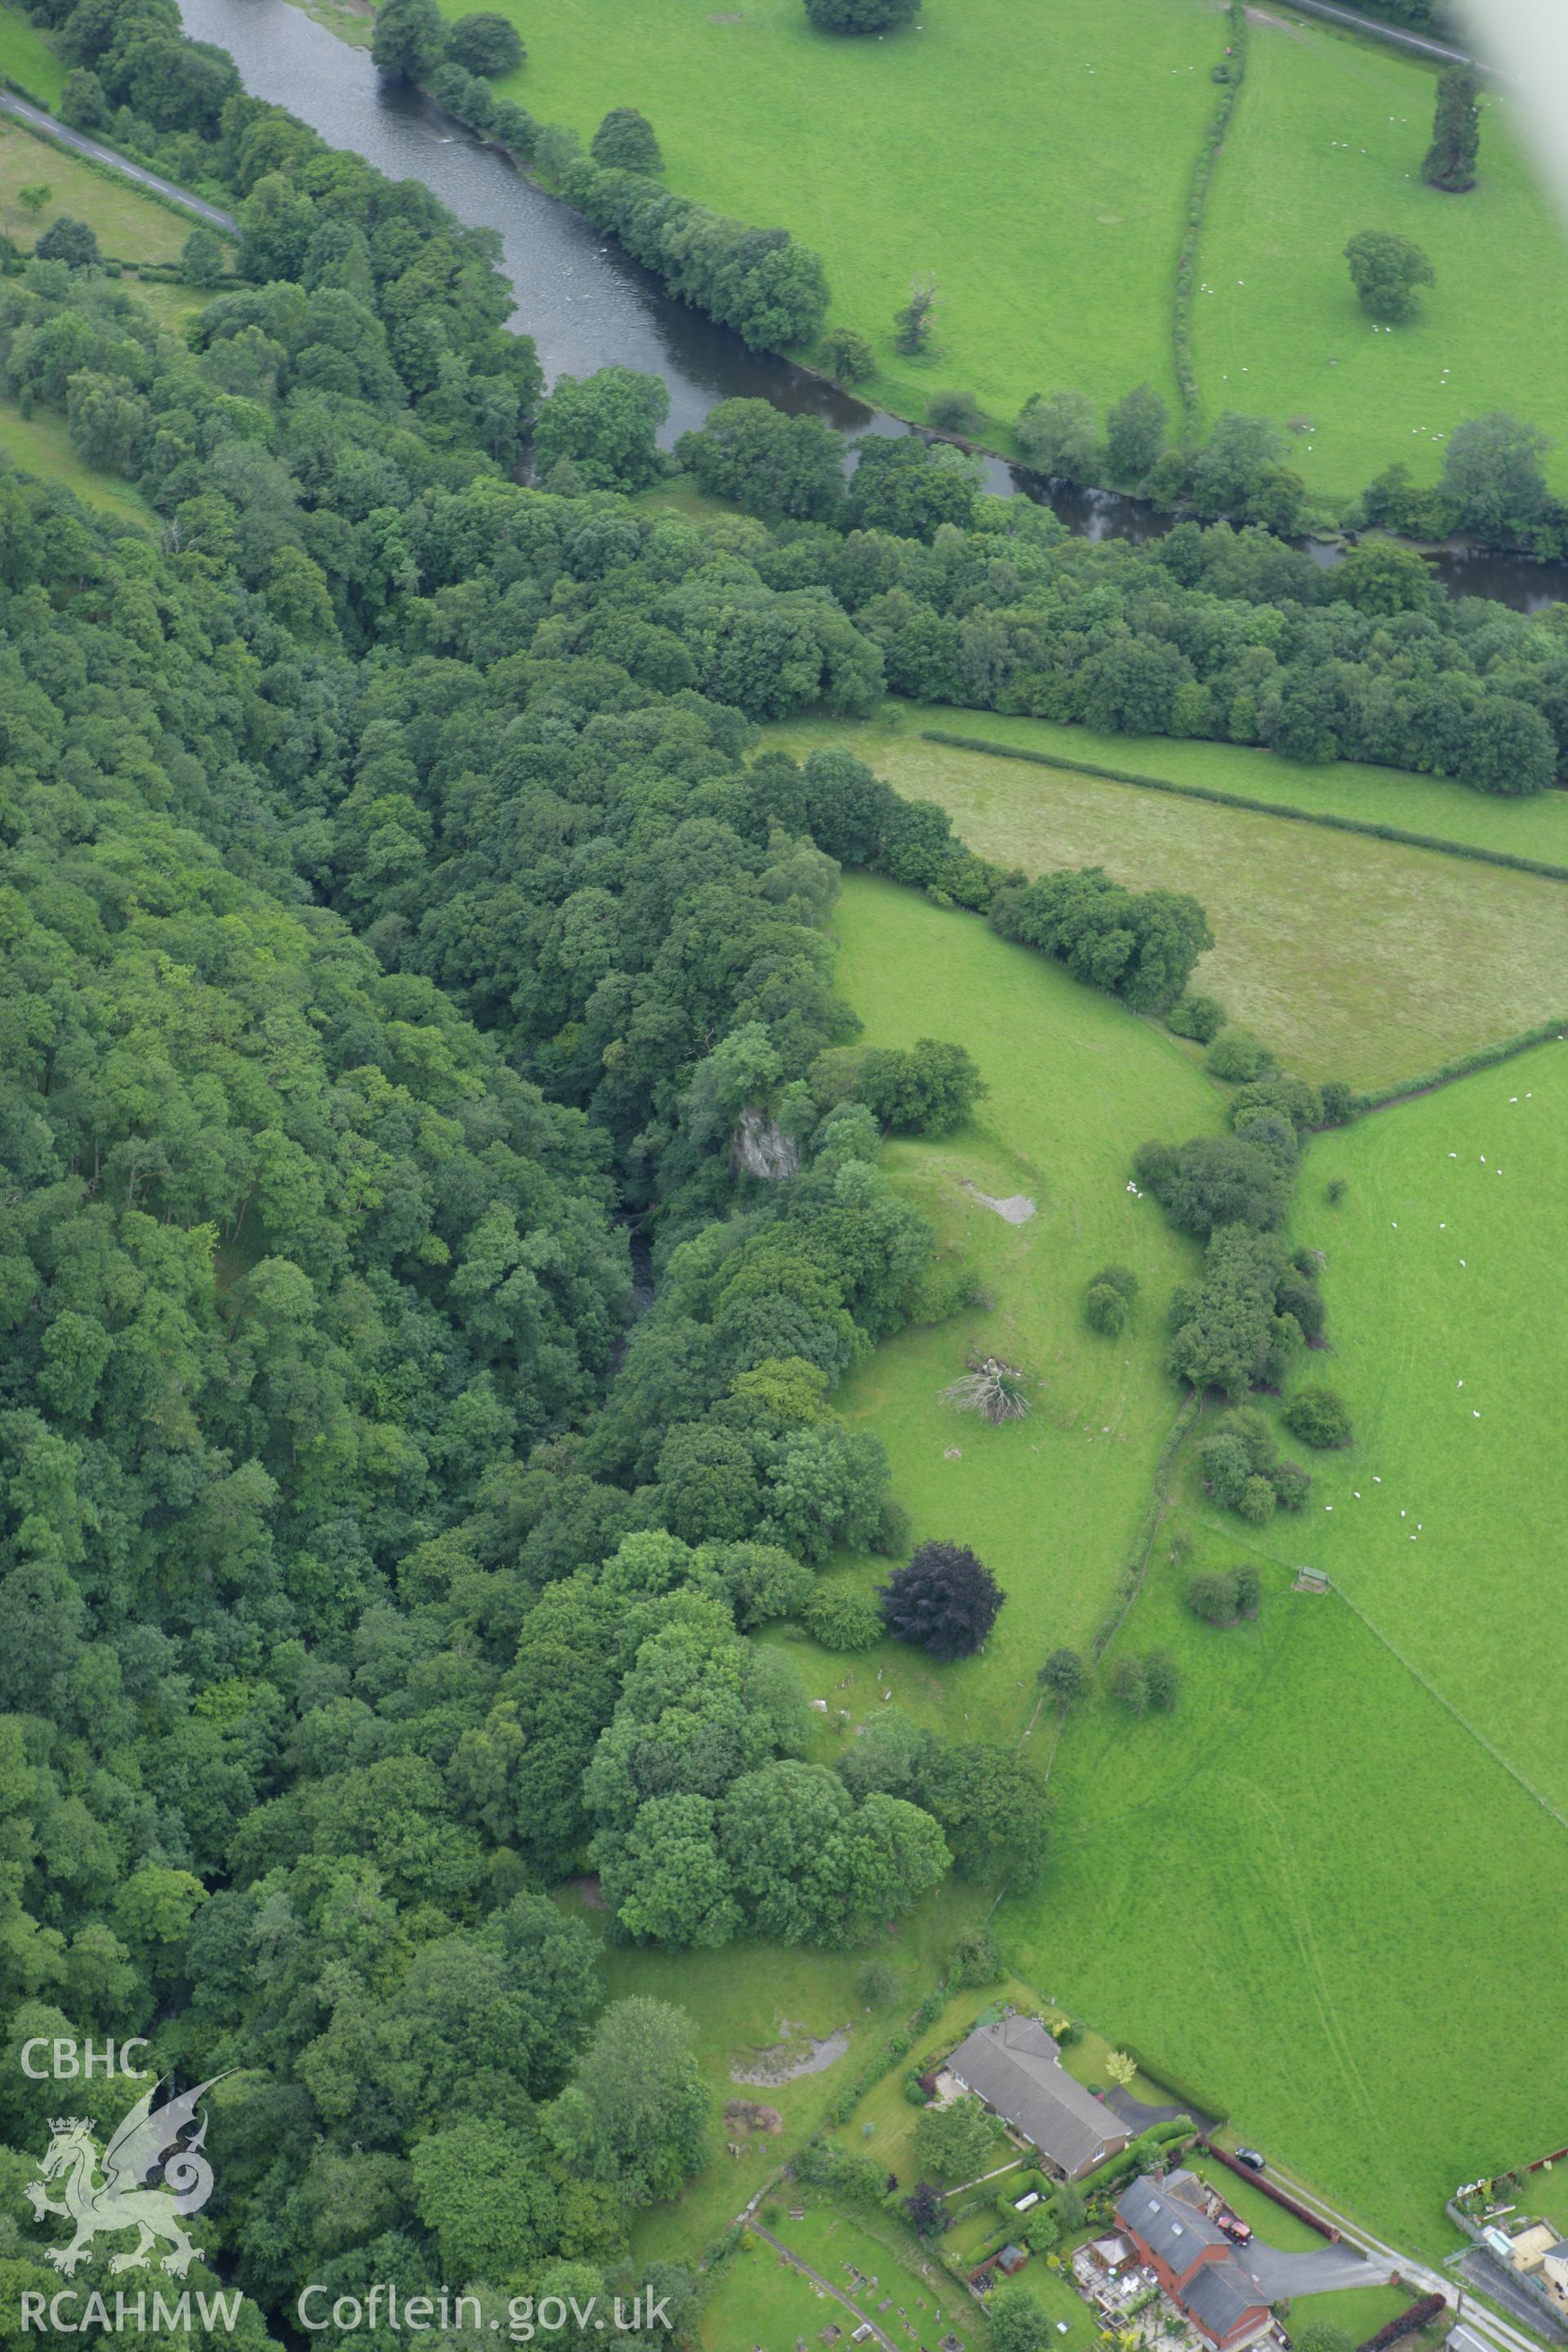 RCAHMW colour oblique aerial photograph of Aberedw Castle Mound. Taken on 09 July 2007 by Toby Driver